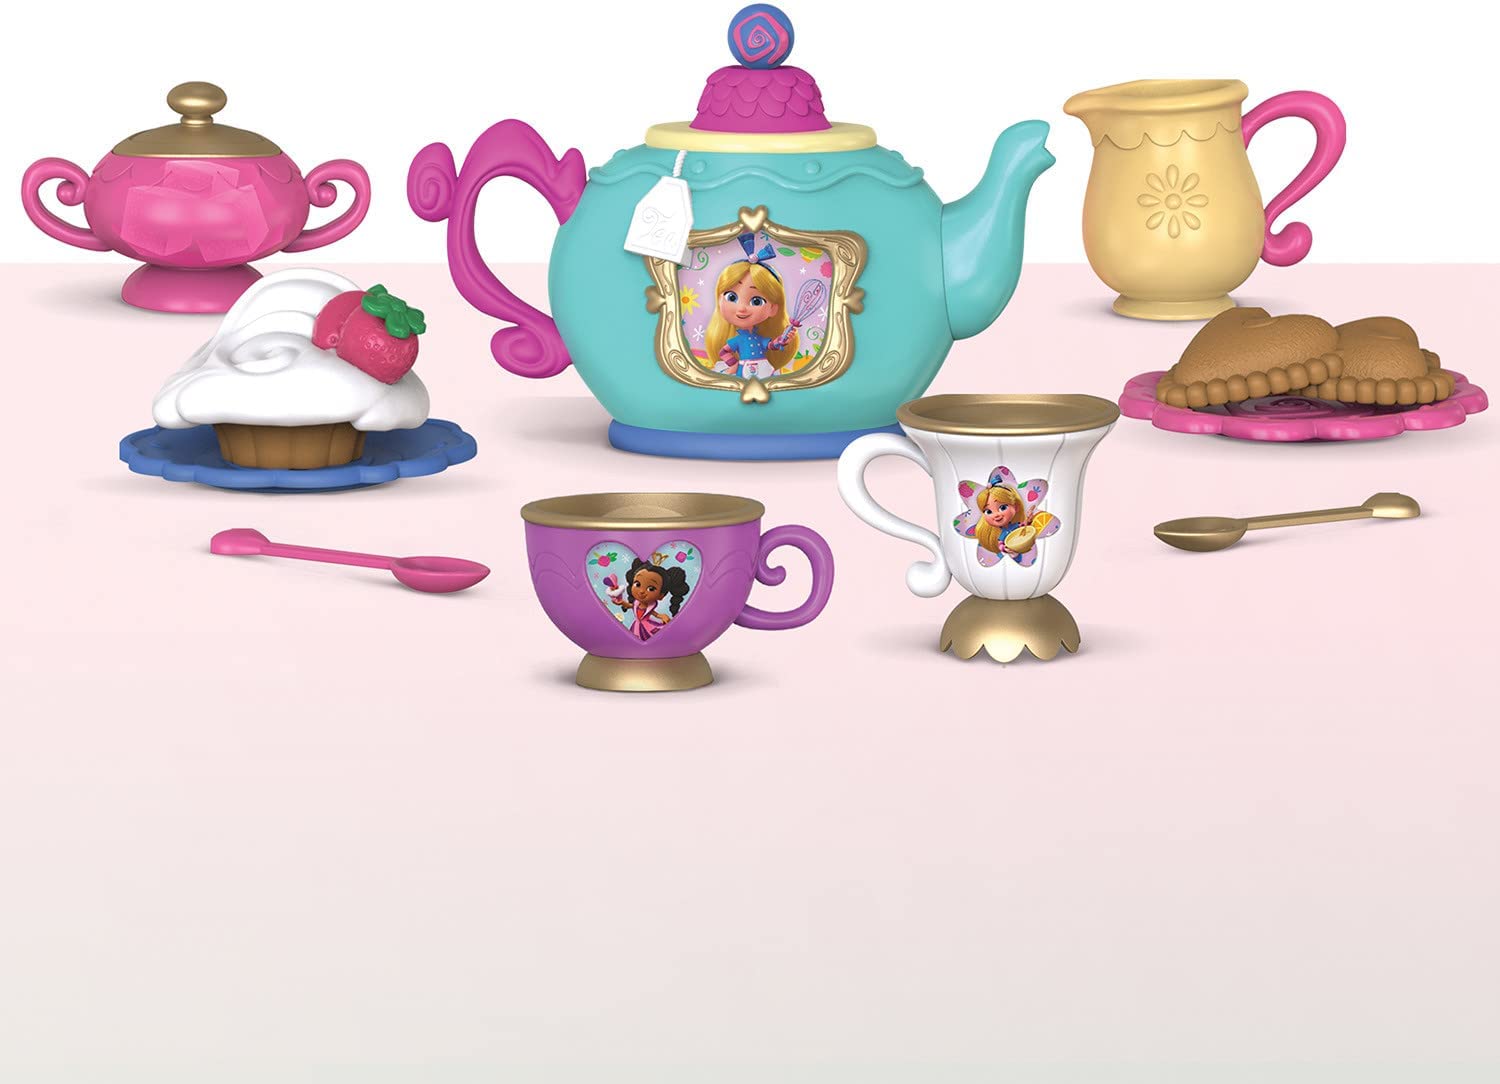 Disney Junior Alice’s Wonderland Bakery 11-Piece Tea Party Toy Set $11 & More + Free Shipping w/ Prime or on $25+